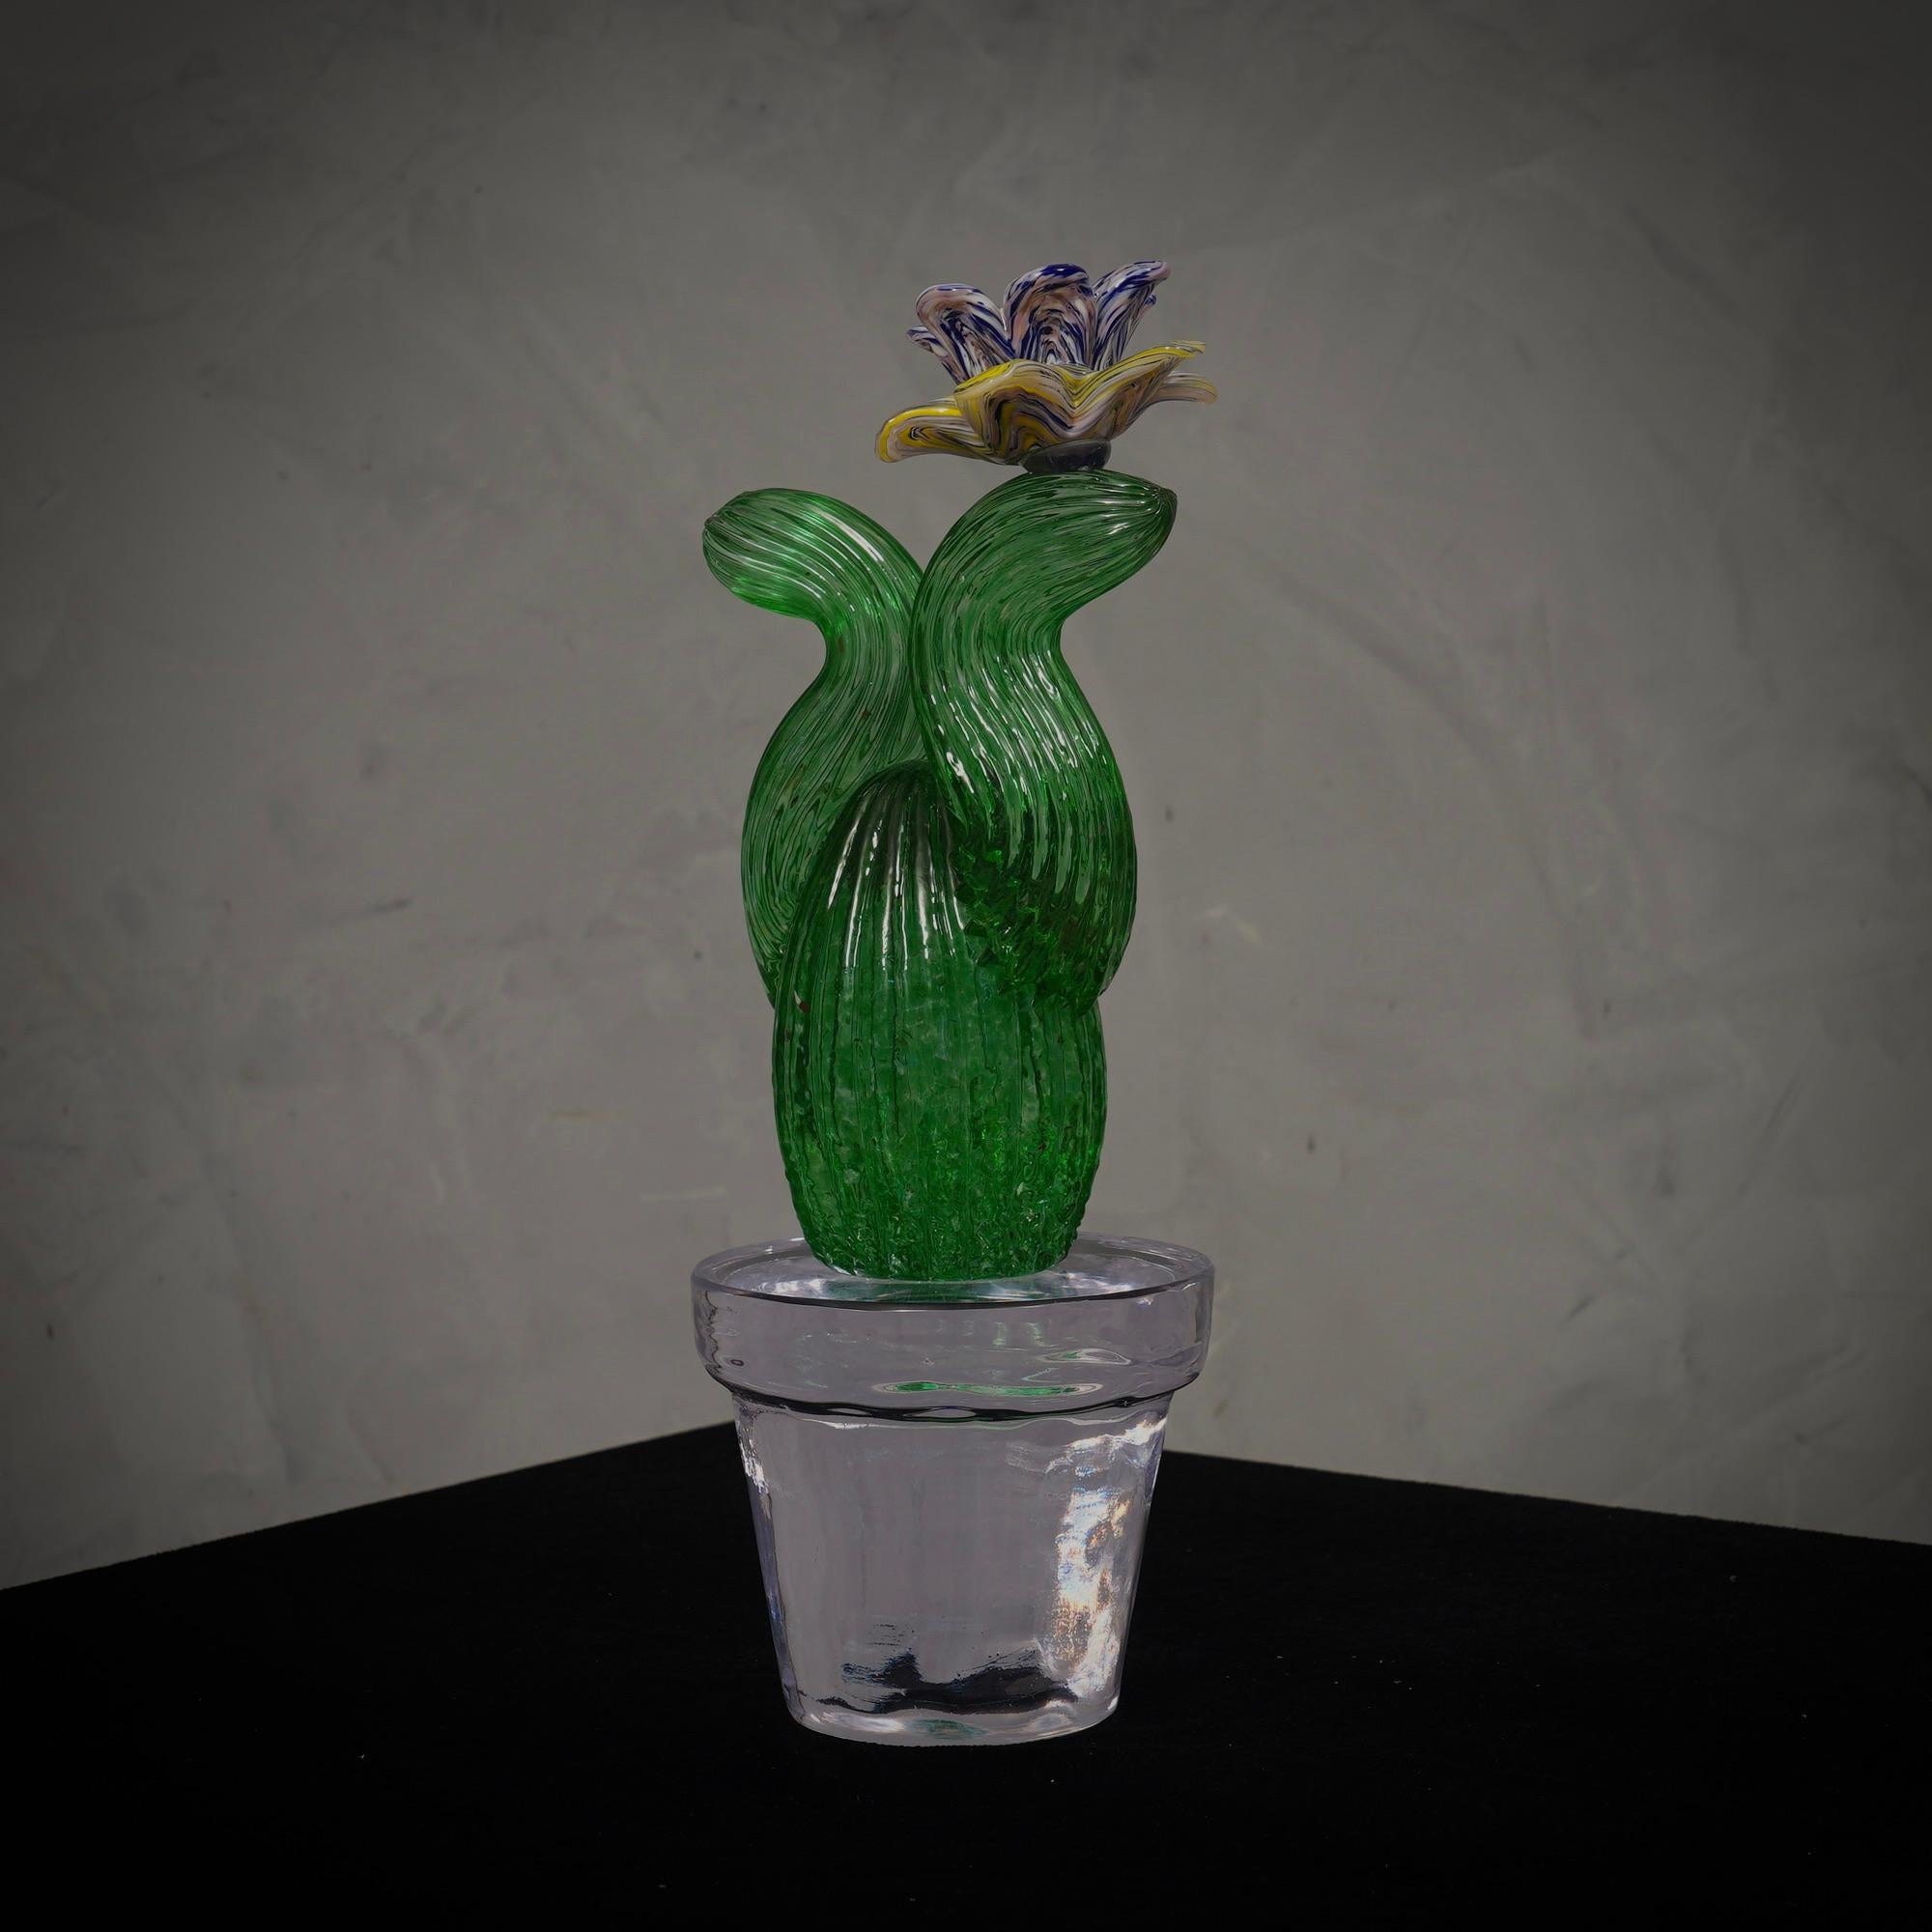 Italian design by Marta Marzotto creator of style, this cactus is a fashion icon of the Italian style, emerald green with a multi colored spot, the flower. Refinement and class as in Marta Marzotto's style, one-of-a-kind pieces that always remain